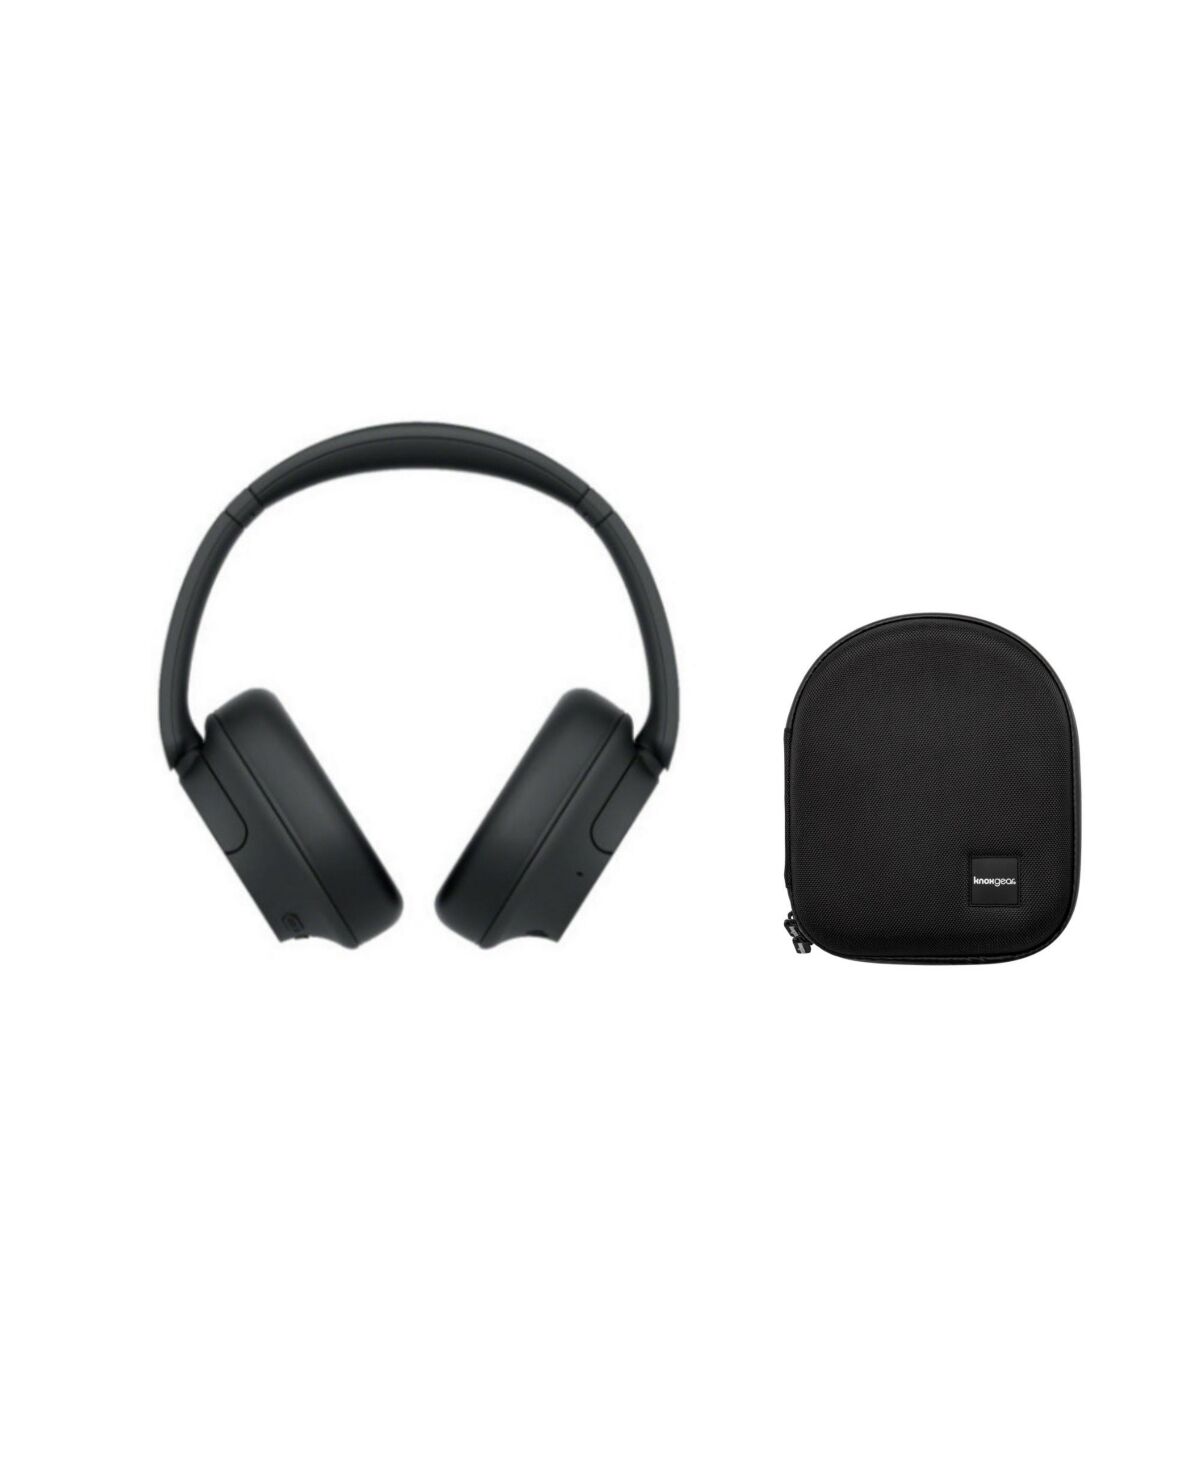 Sony Wireless Over The Ear Noise Canceling Headphones with Protective Case - Black